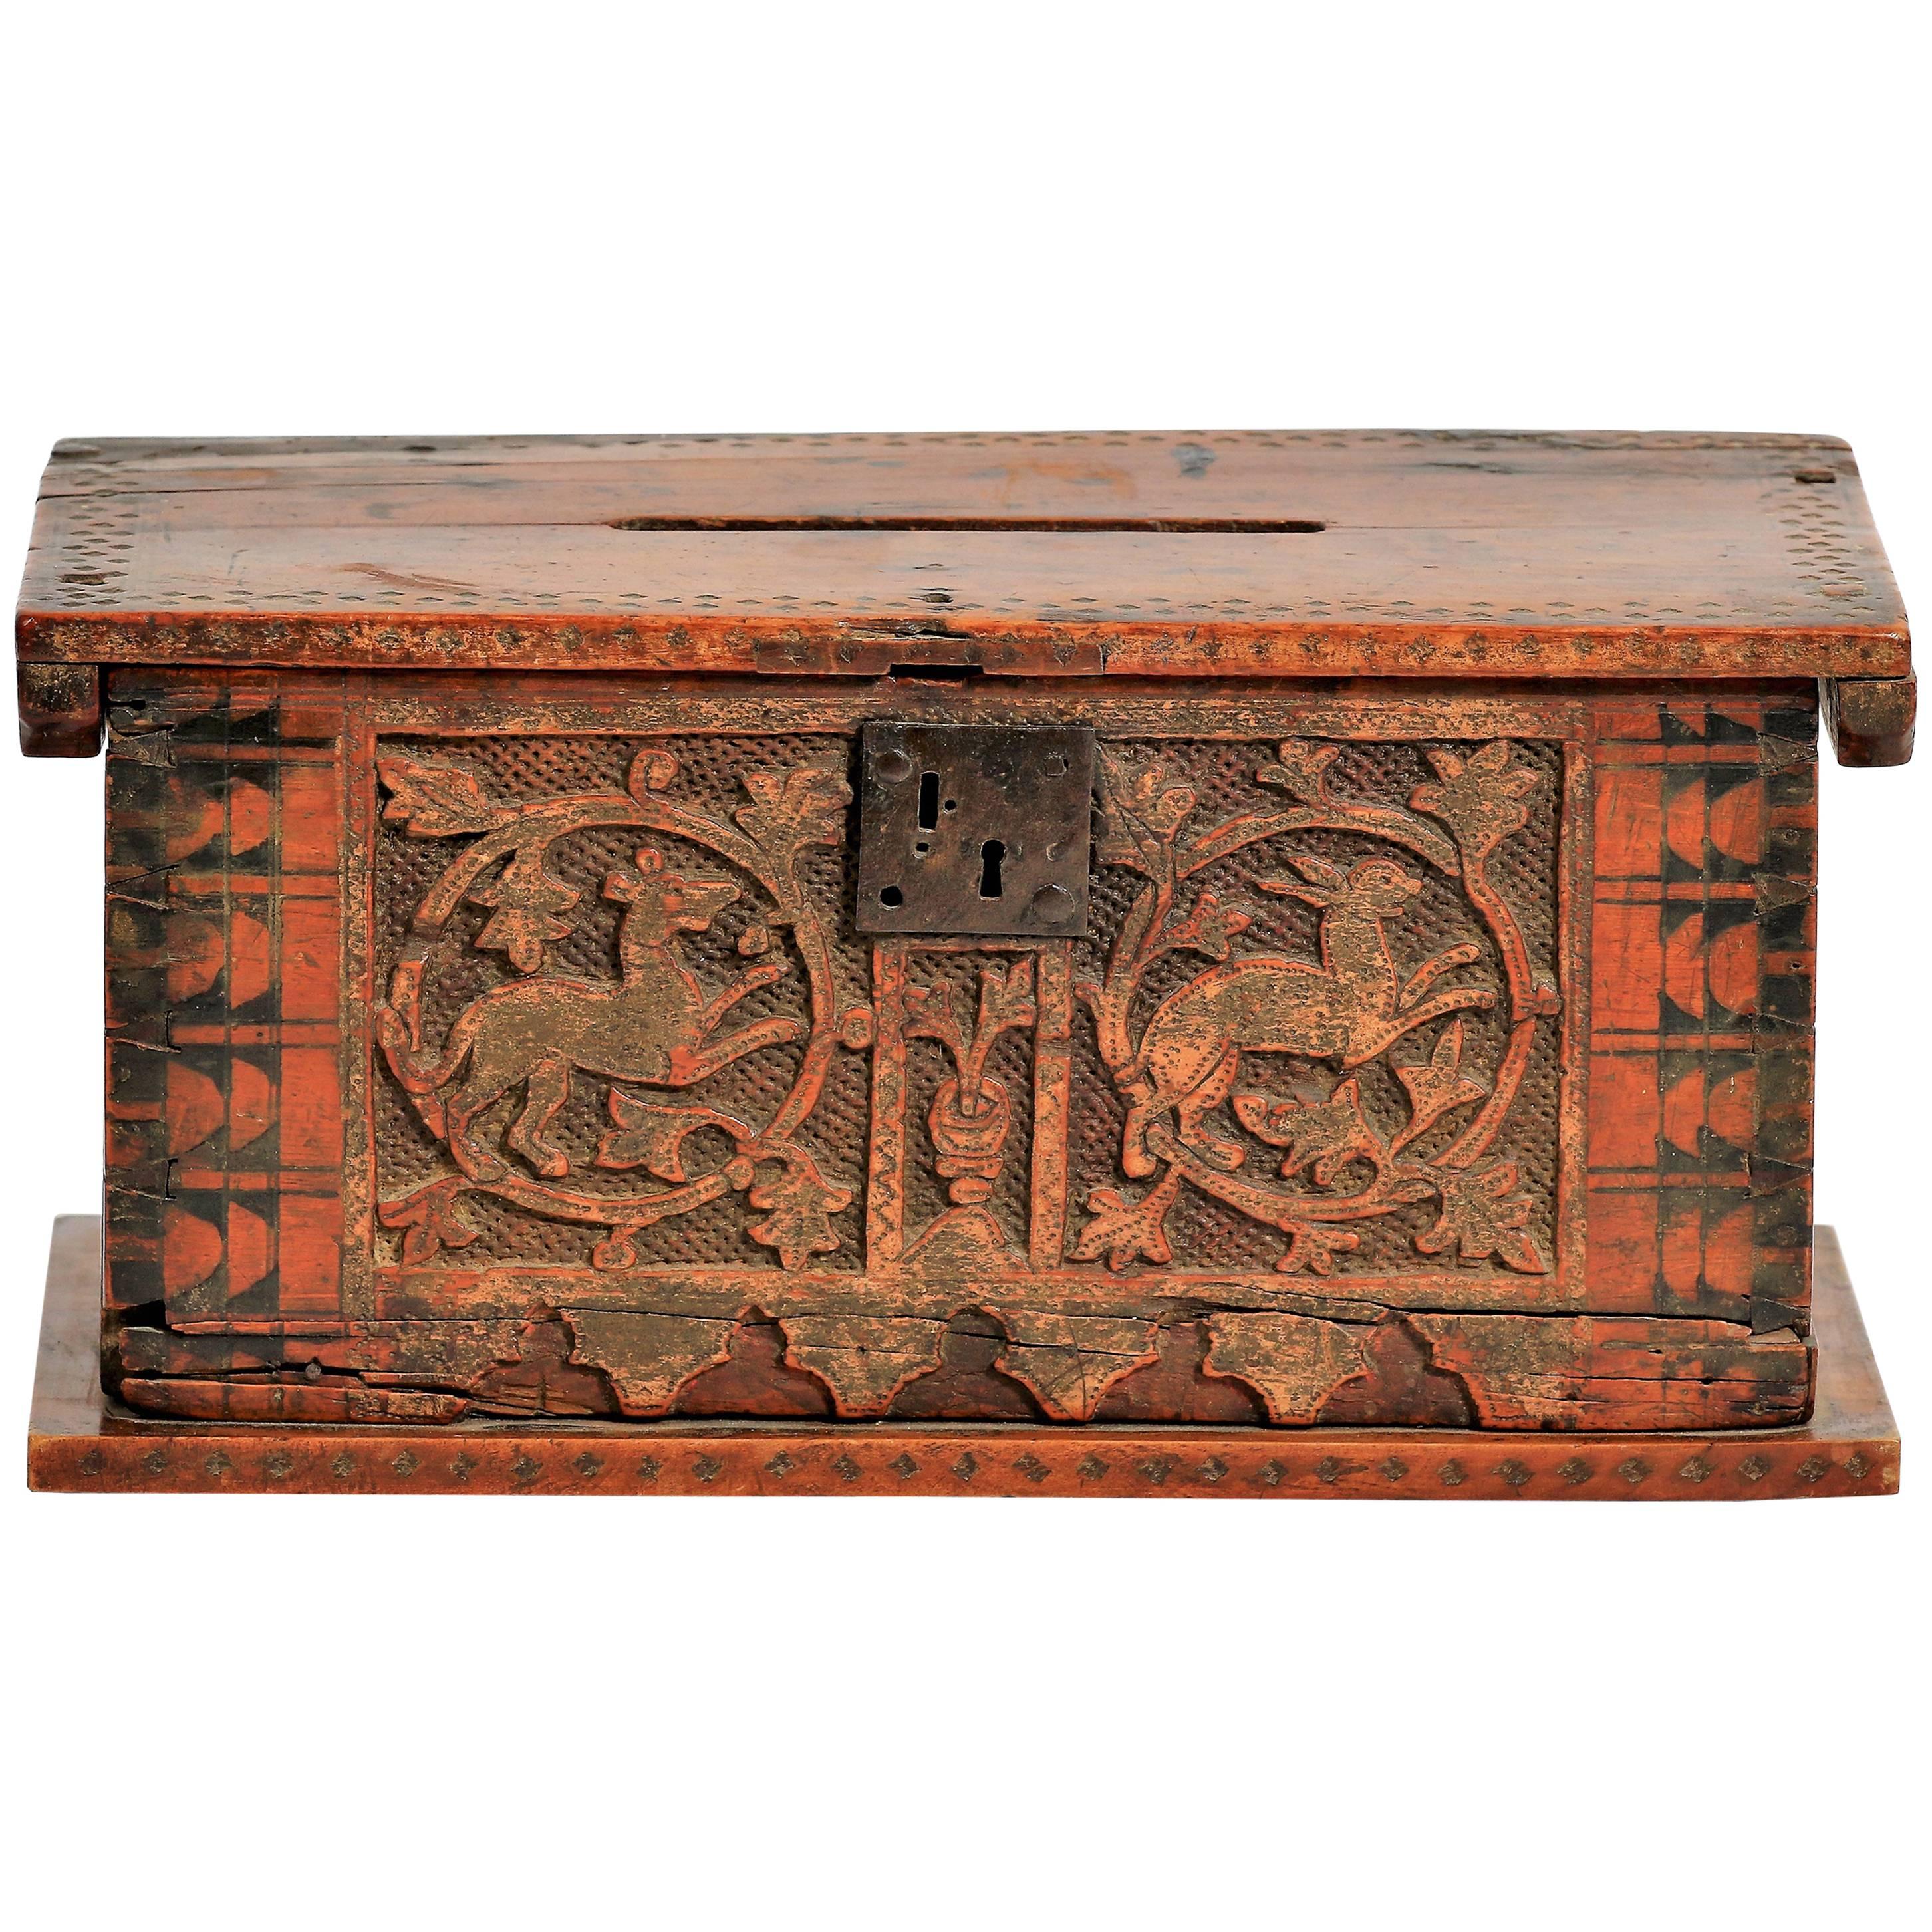 Very Rare Casket Minnekästchen or Box, Germany or Italy, 15th Century